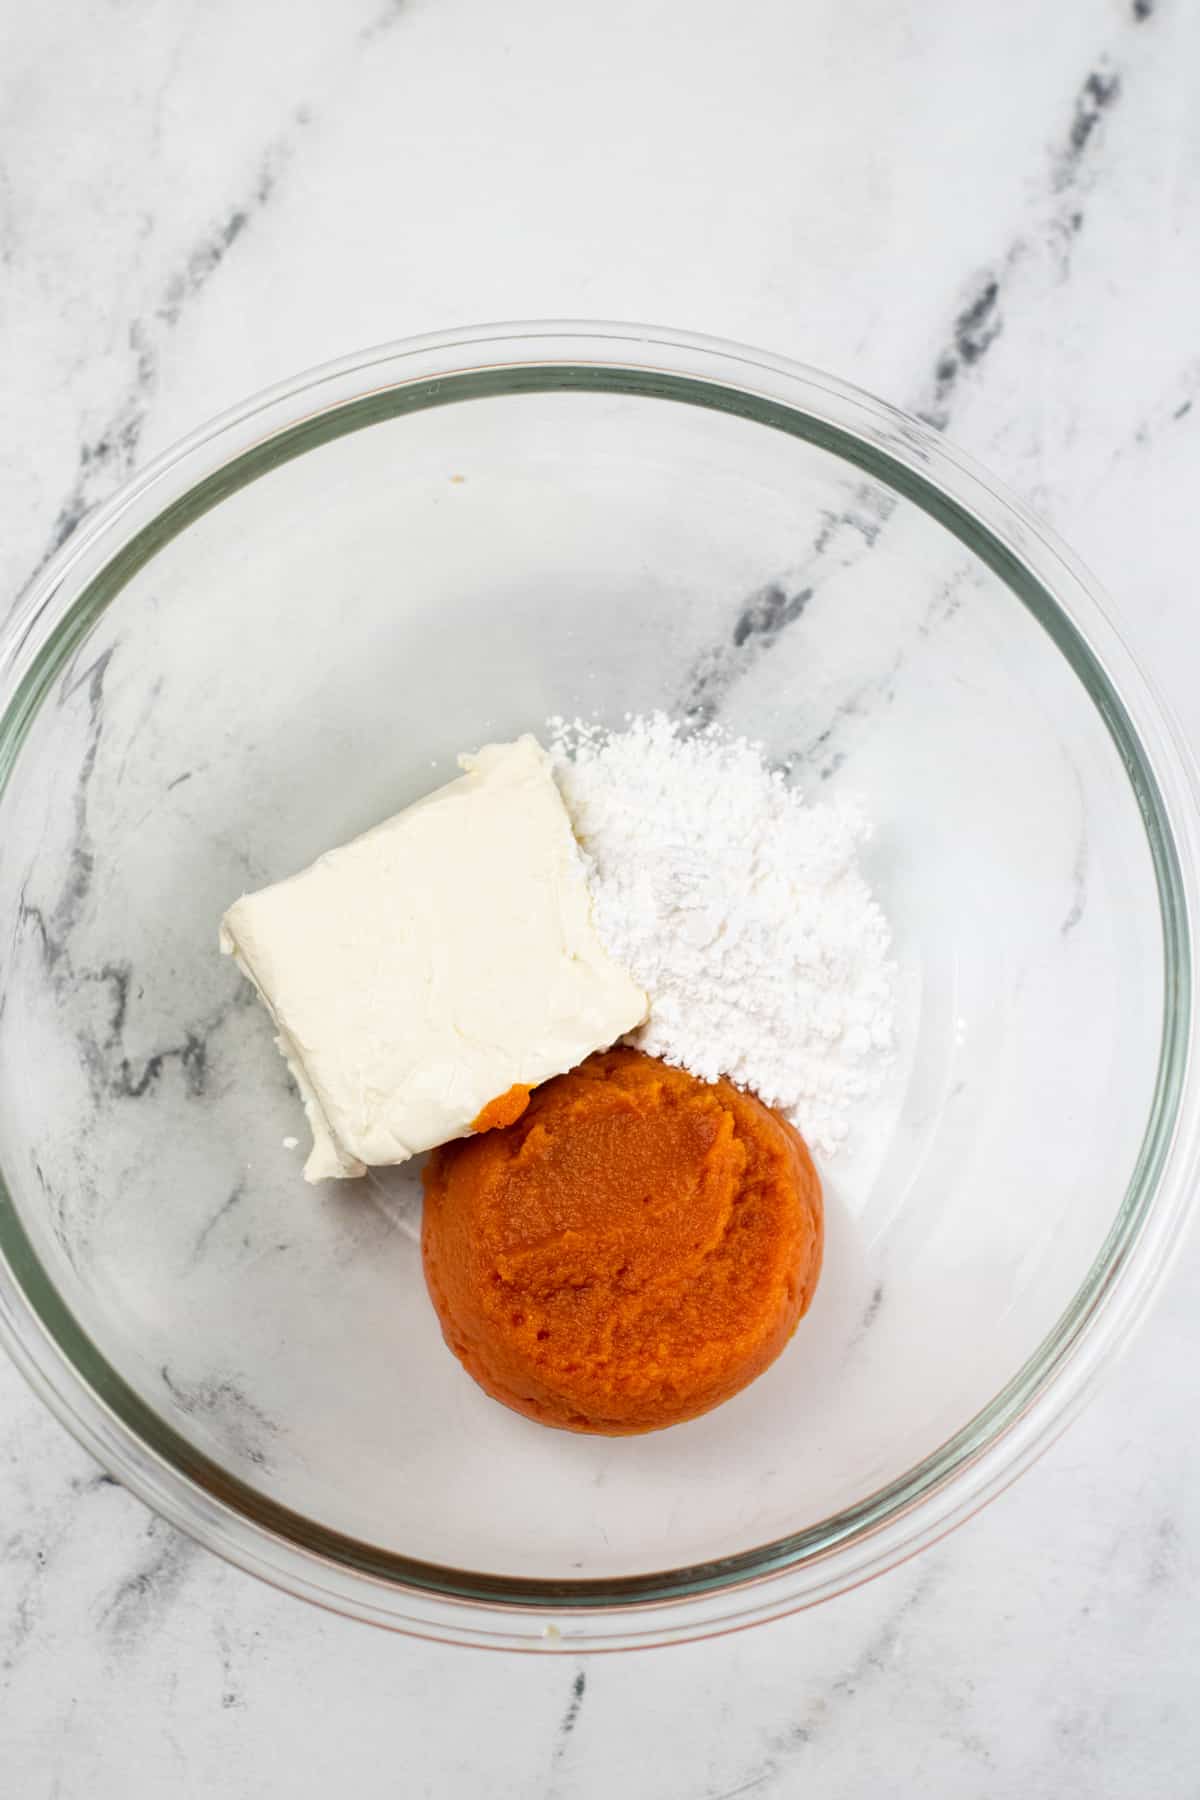 One process for making Pumpkin Truffles is to beat beat cream cheese and powdered sugar together until well blended.